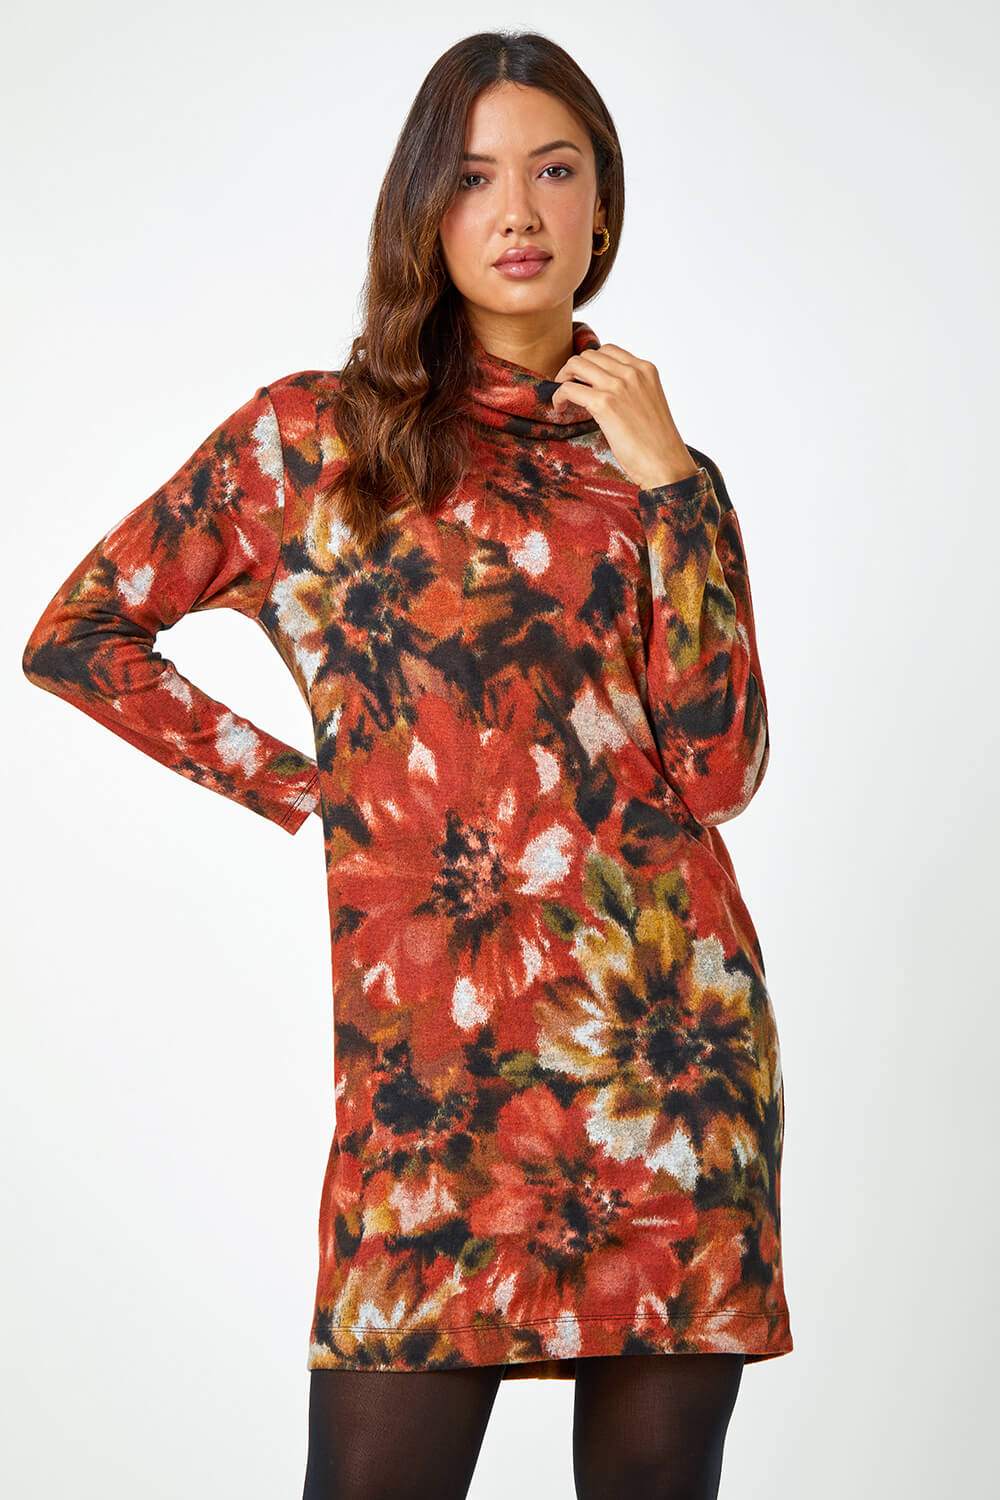 Rust Floral Tie Dye Print Tunic Stretch Dress, Image 2 of 5